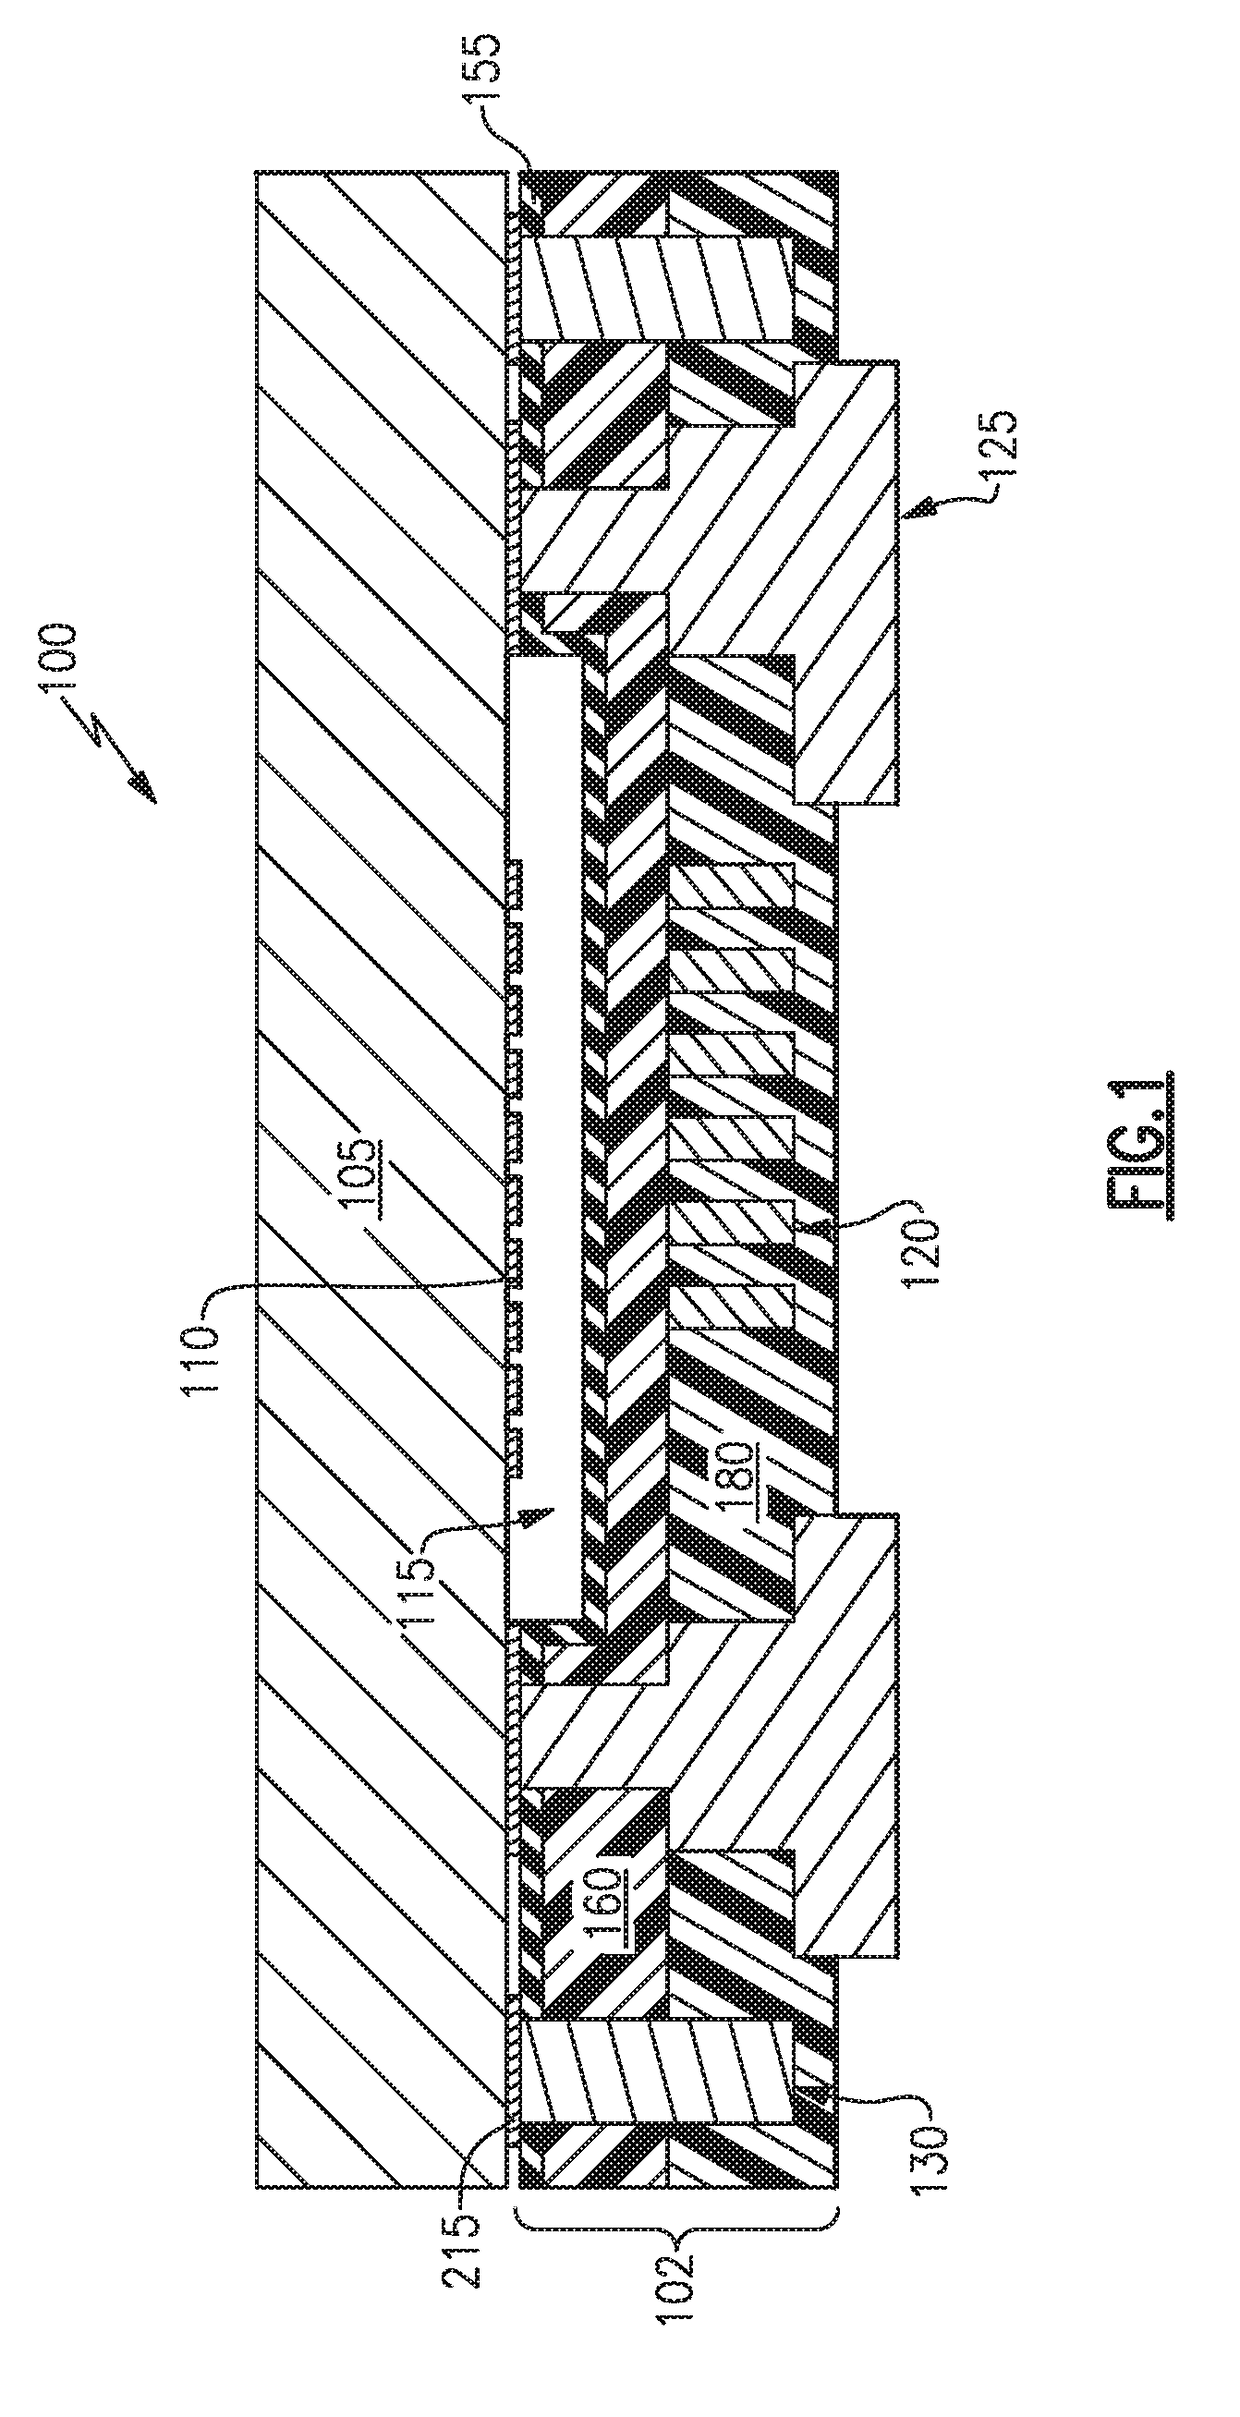 Method of providing protective cavity and integrated passive components in wafer level chip scale package using a carrier wafer